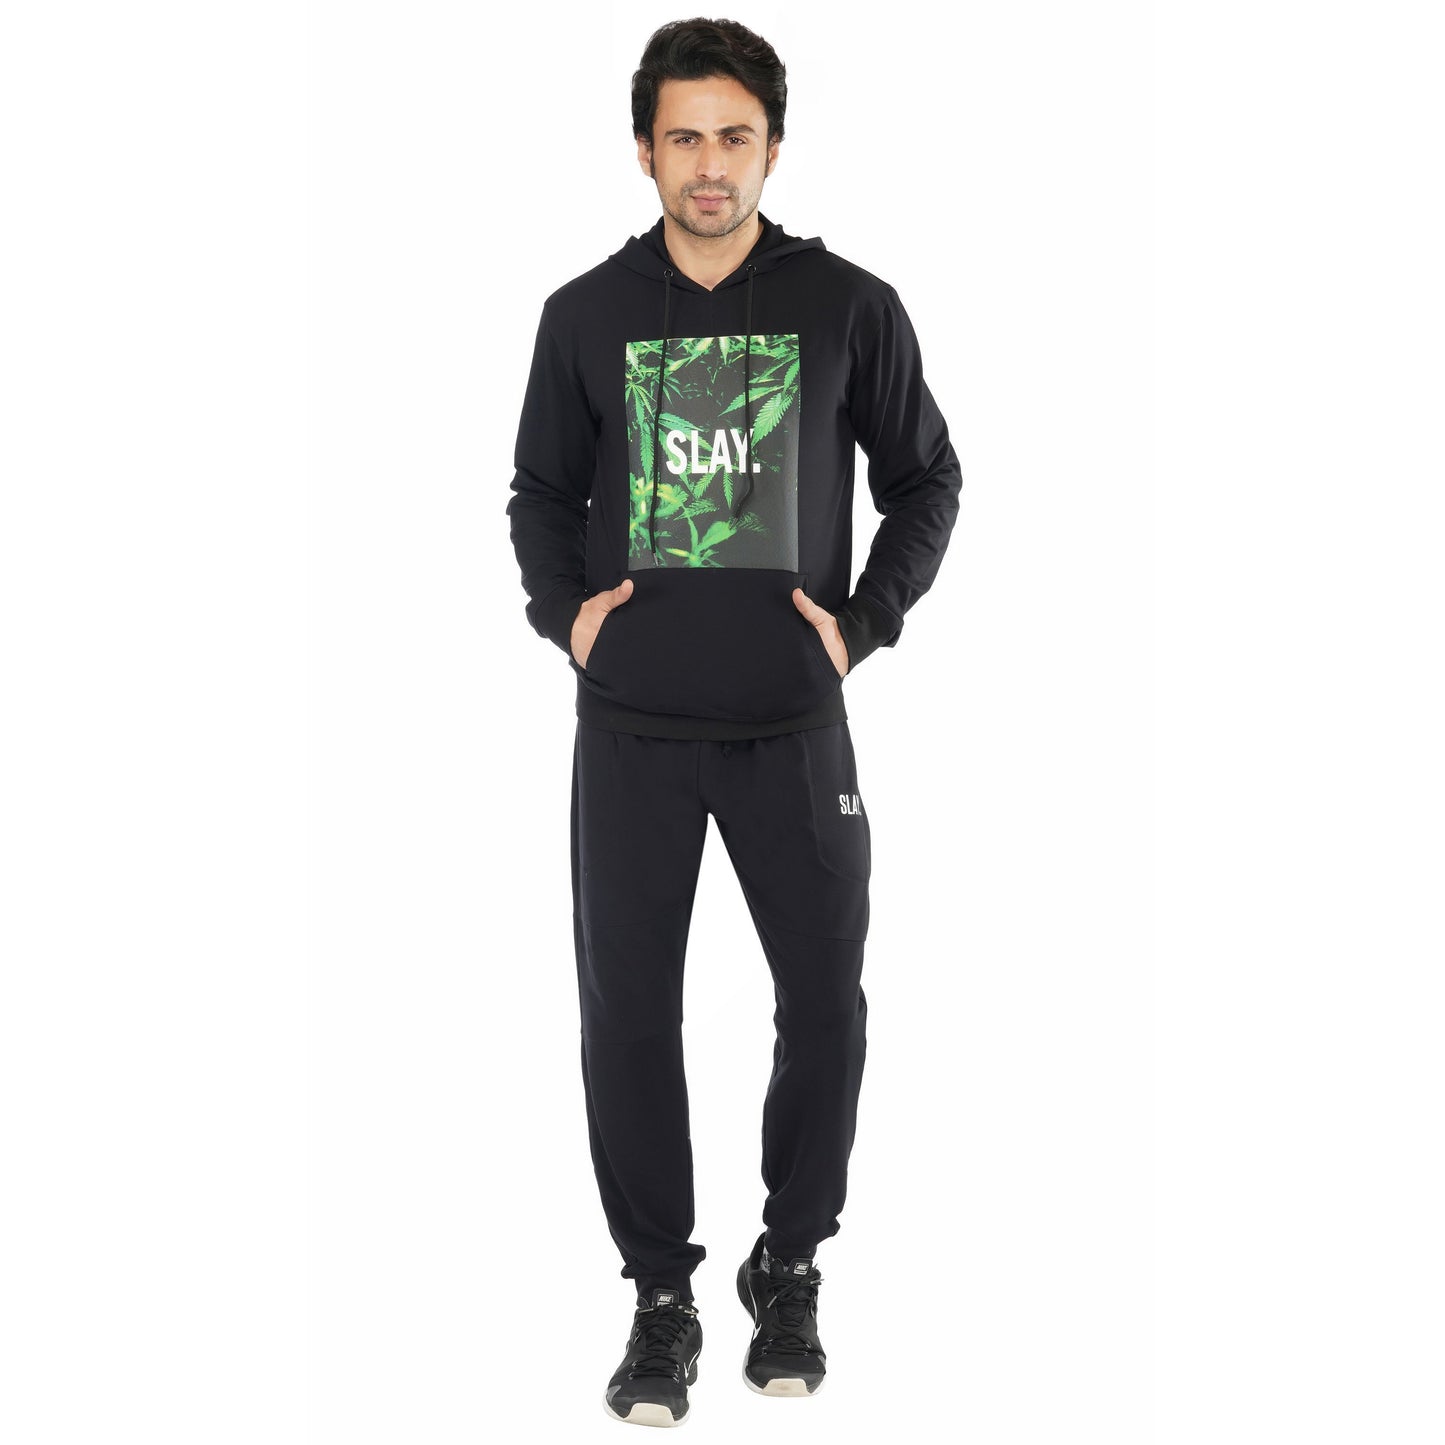 SLAY. Men's 4/20 Edition Leaves Printed Tracksuit-clothing-to-slay.myshopify.com-Tracksuit